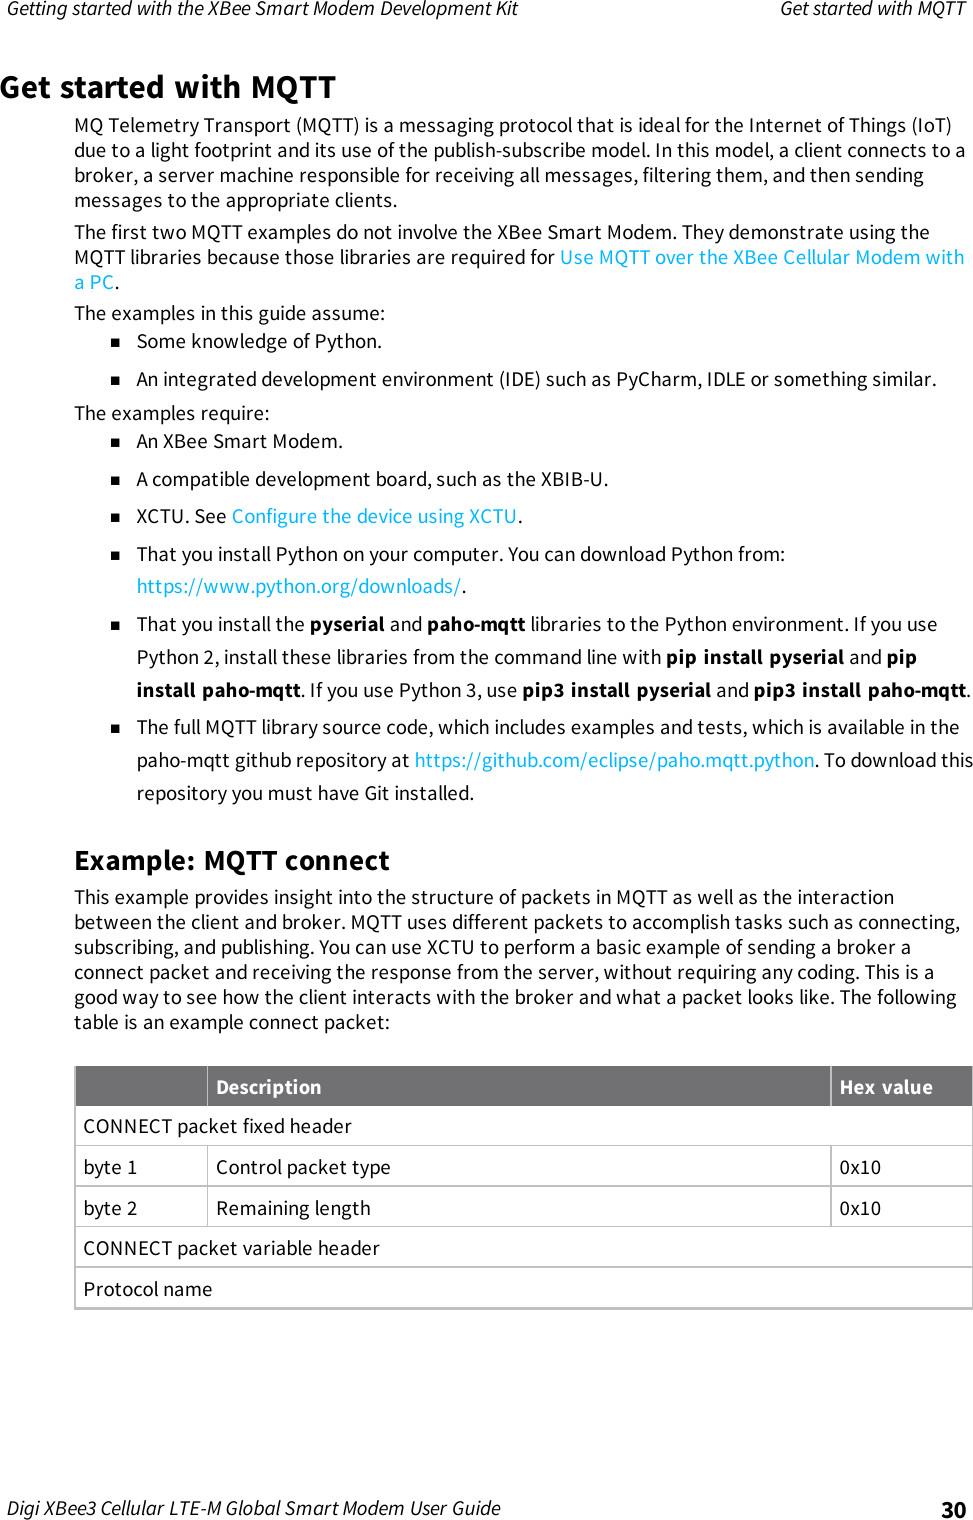 Page 30 of Digi XB3M1 XBee3 Cellular LTE-M User Manual 